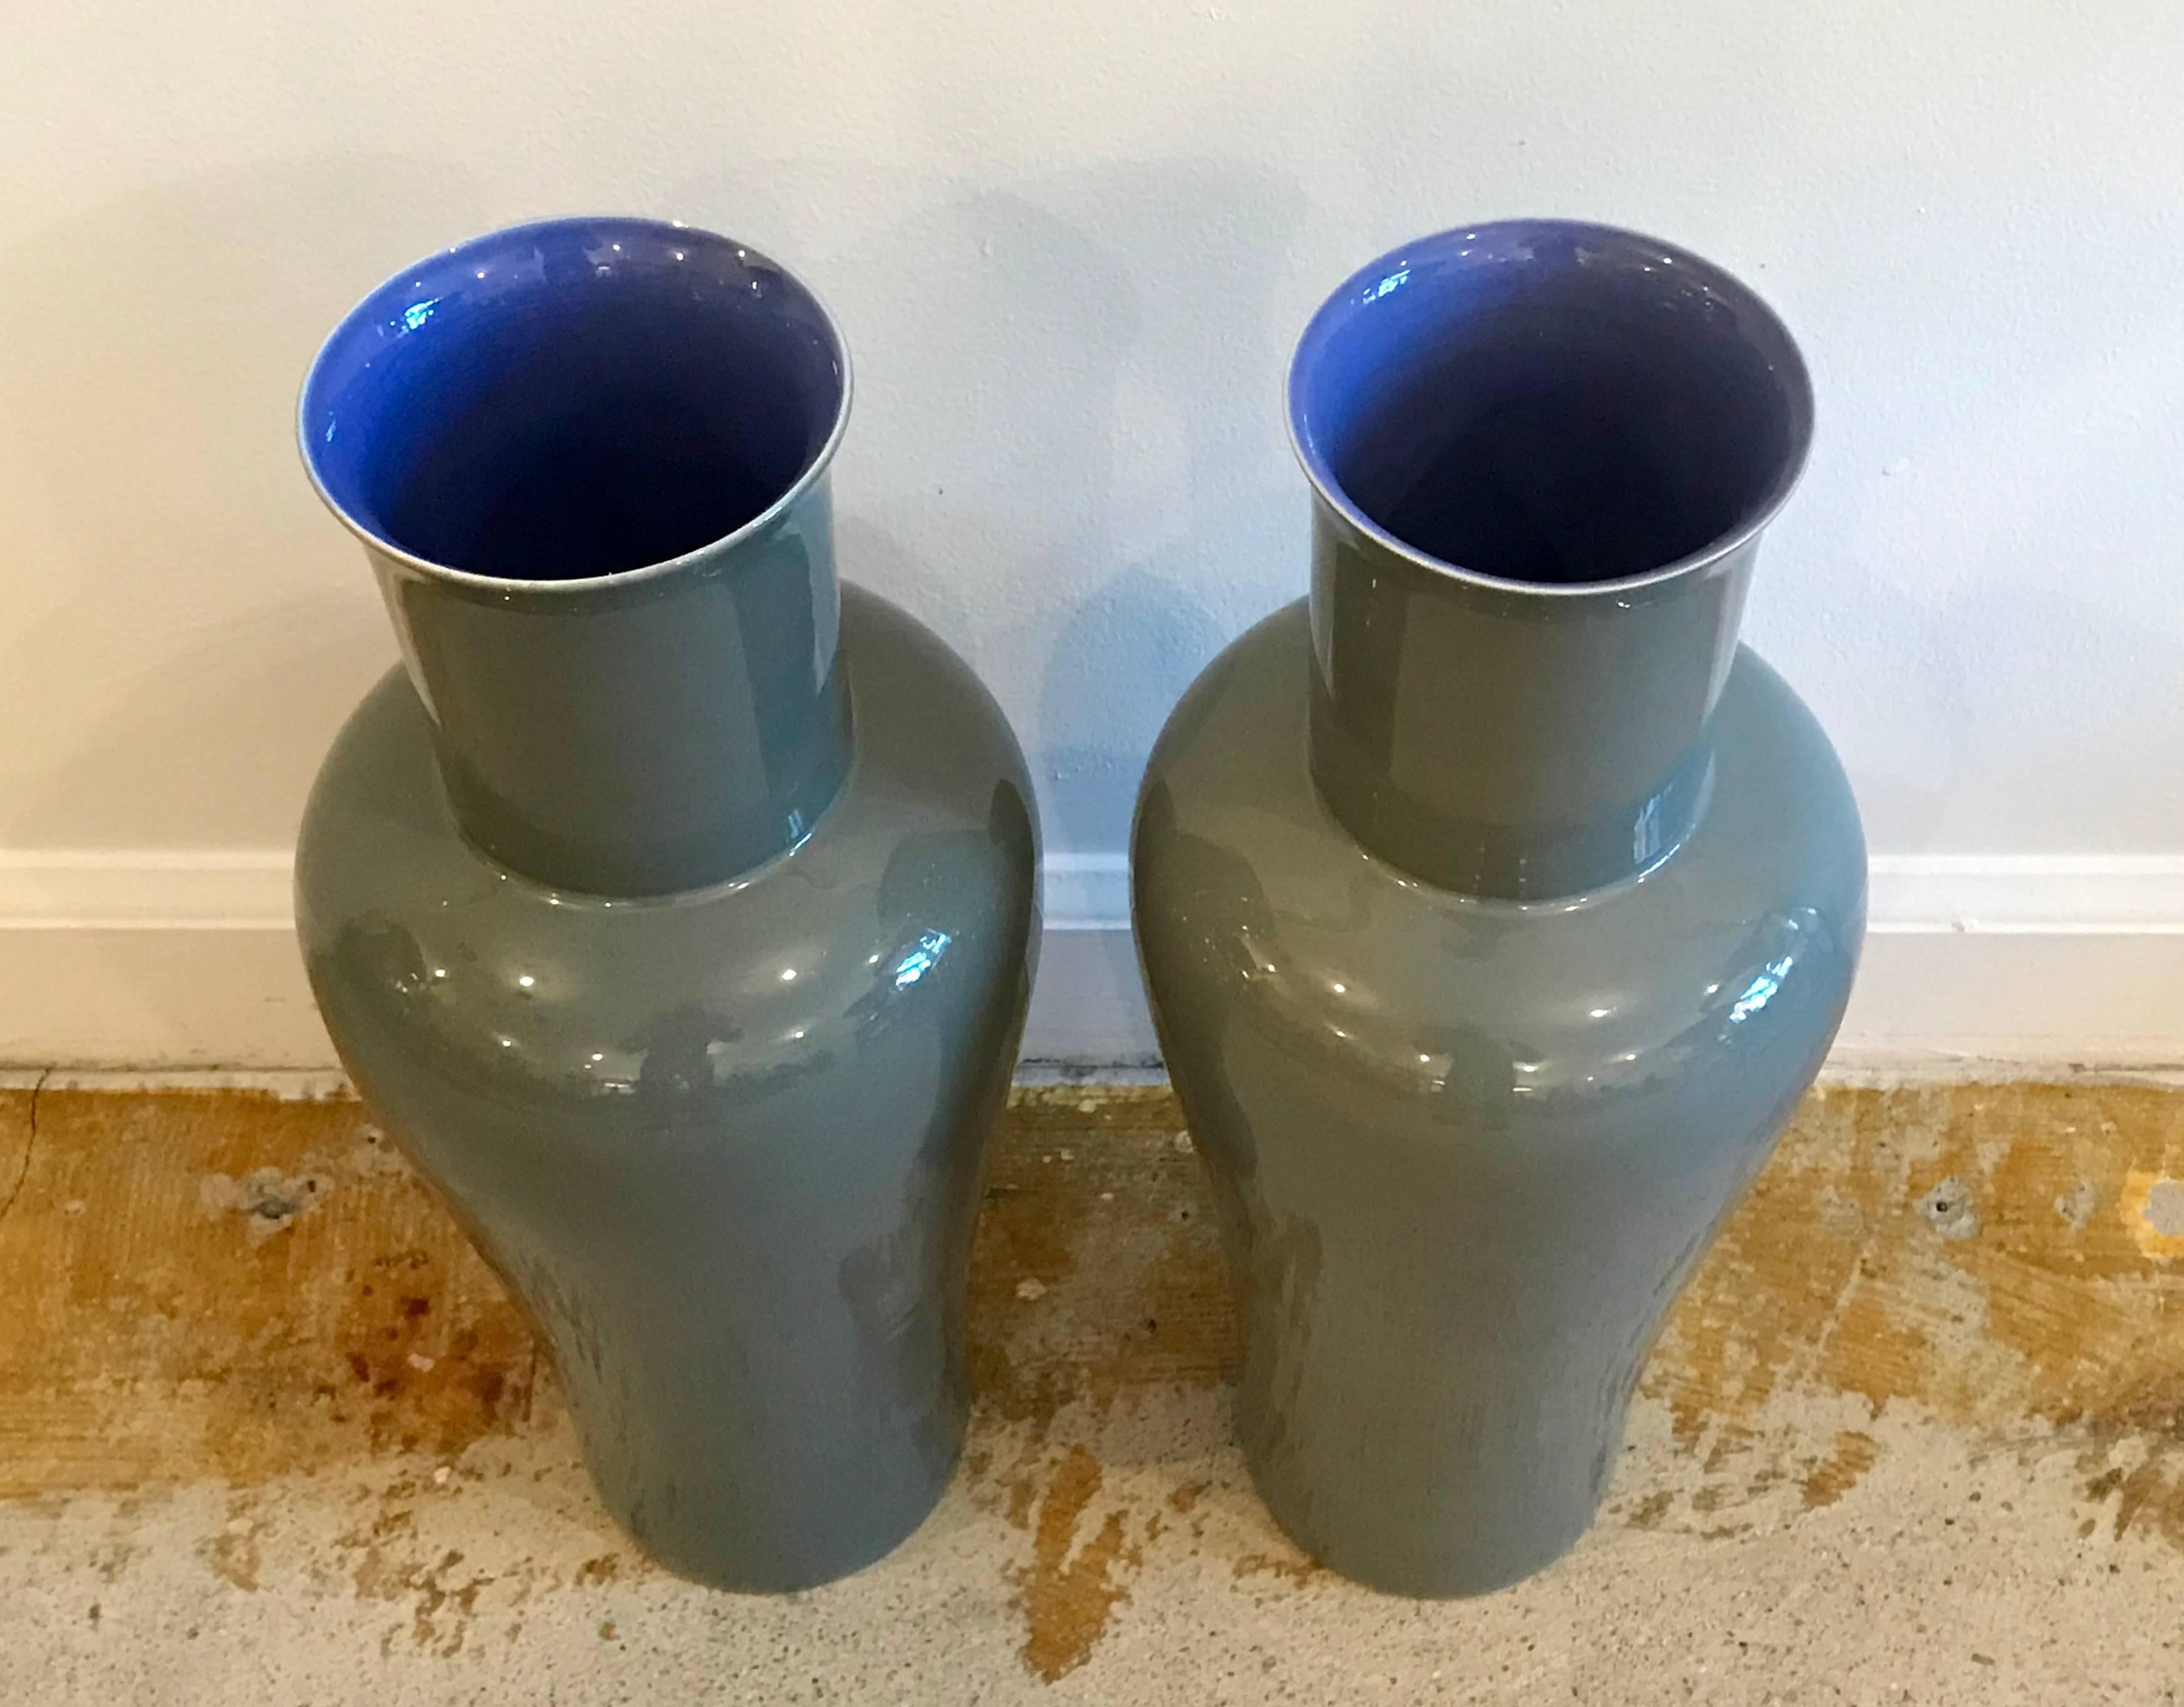 Beautiful pair of contemporary handcrafted porcelain vases by Artist Bo Jai for Middle Kingdom. Putty Gray with contrasting vibrant blue interior. The vases are kiln fired in Jingdezhen China. Each piece signed by the artist.